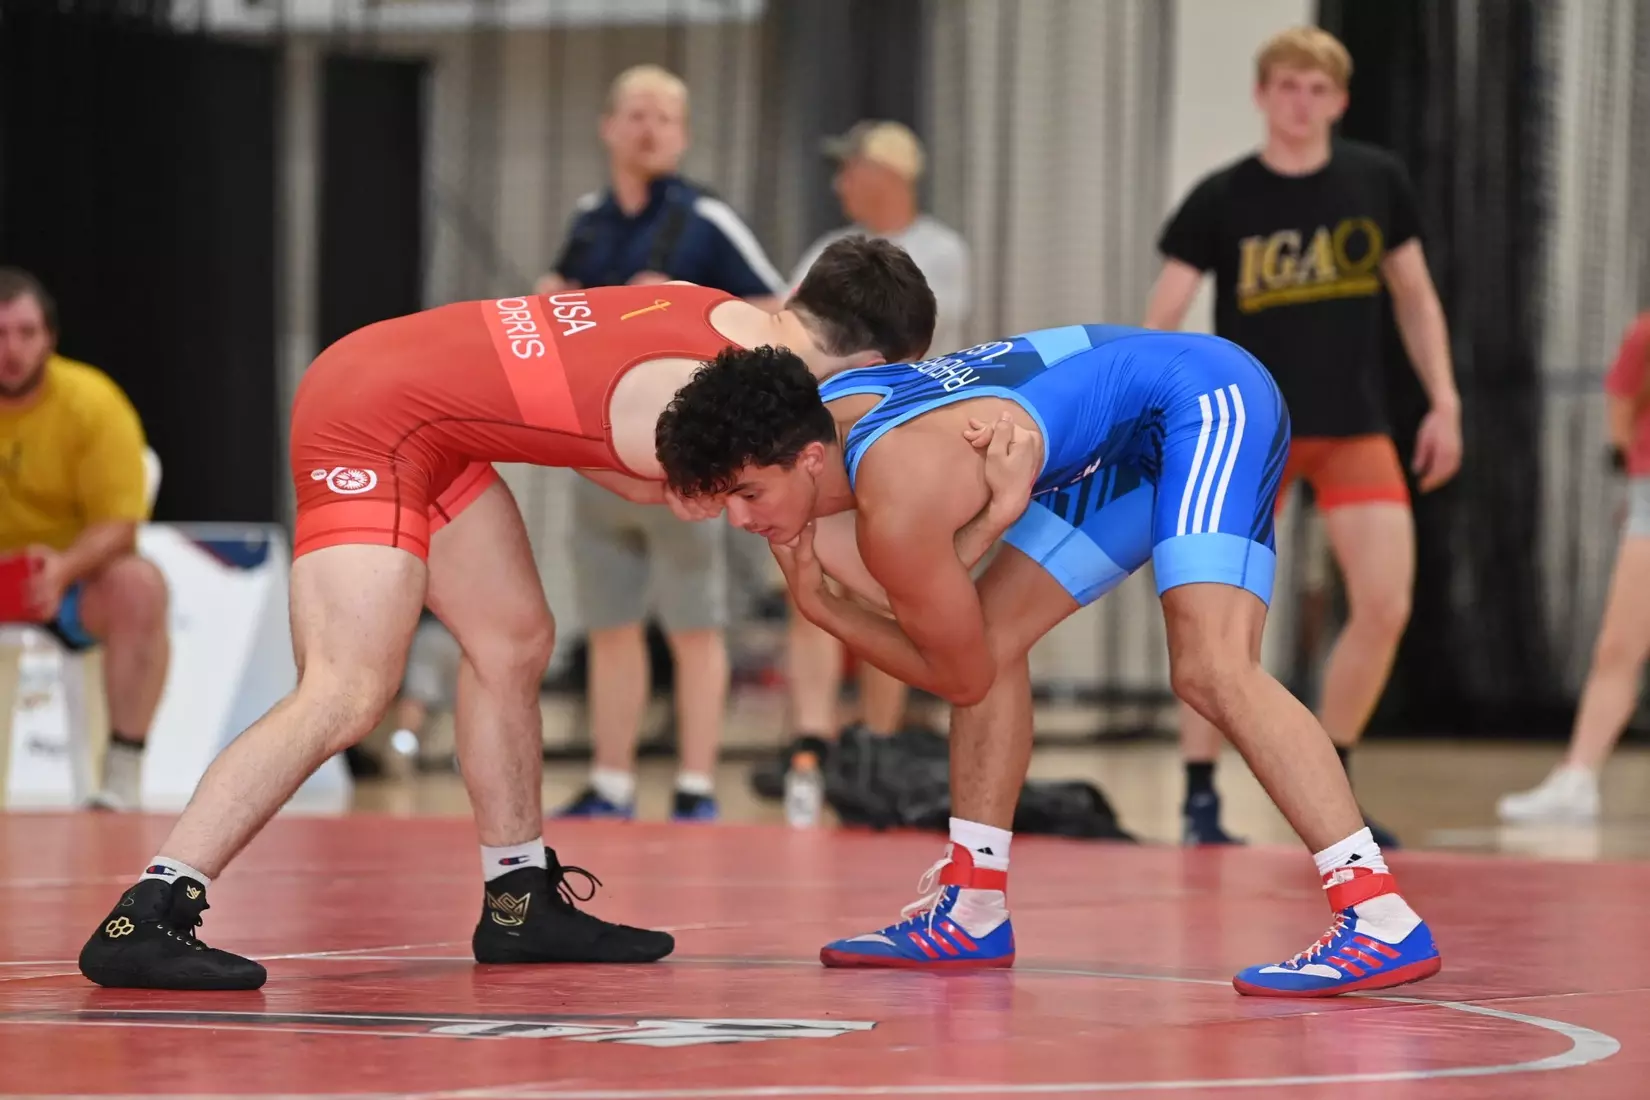 Six Indiana Wrestlers Place at the U23 and U20 World Team Trials